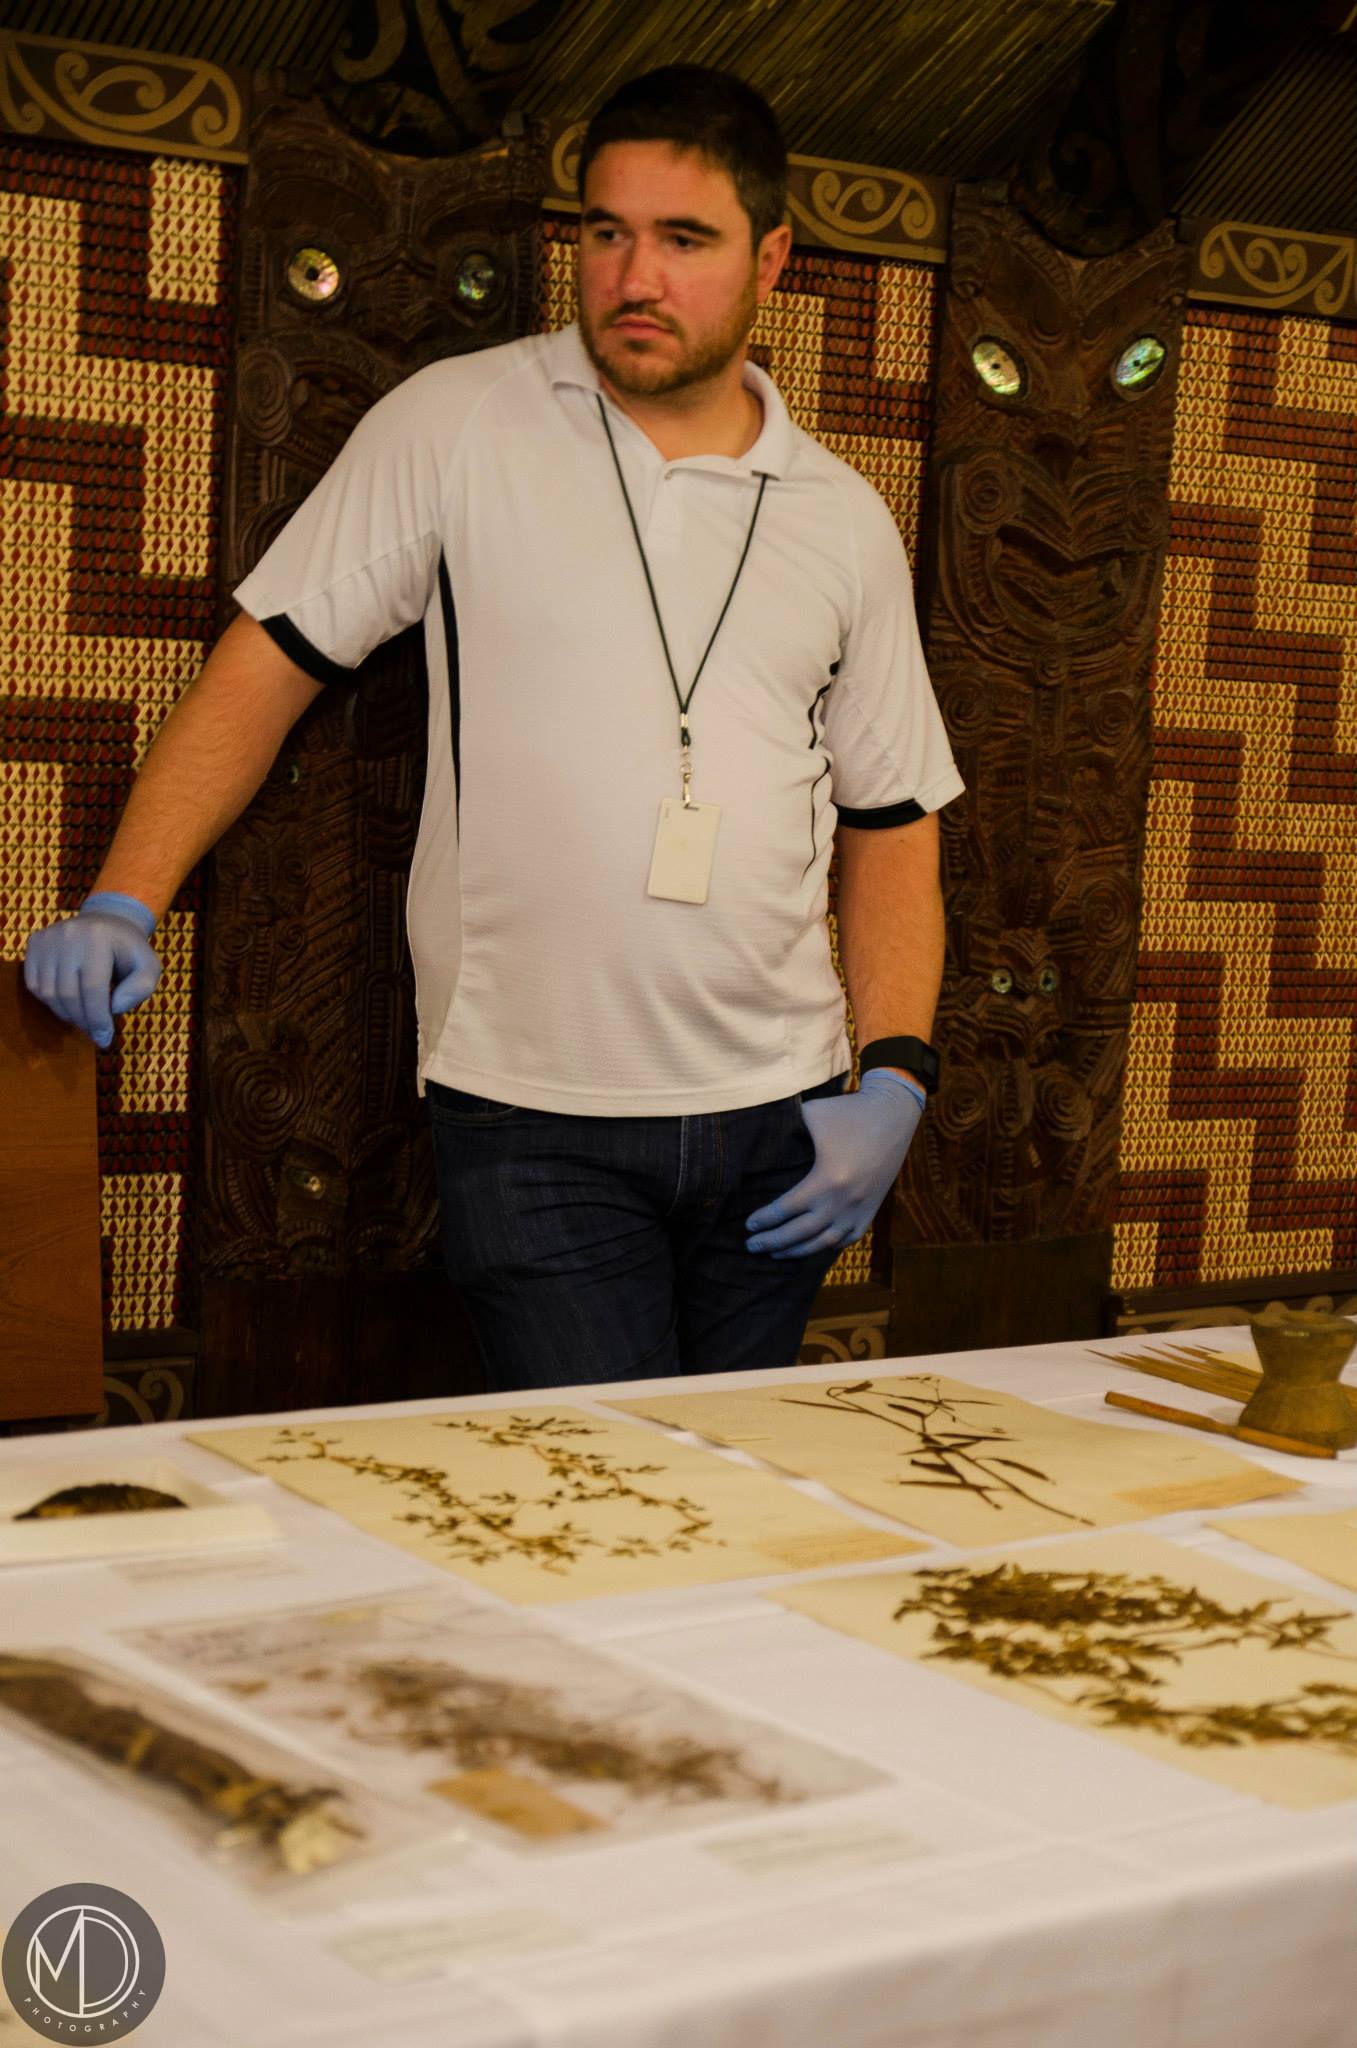 Dustin staffing the botanical specimen table inside Ruatepupuke II. (c) Field Museum of Natural History - CC BY-NC 4.0